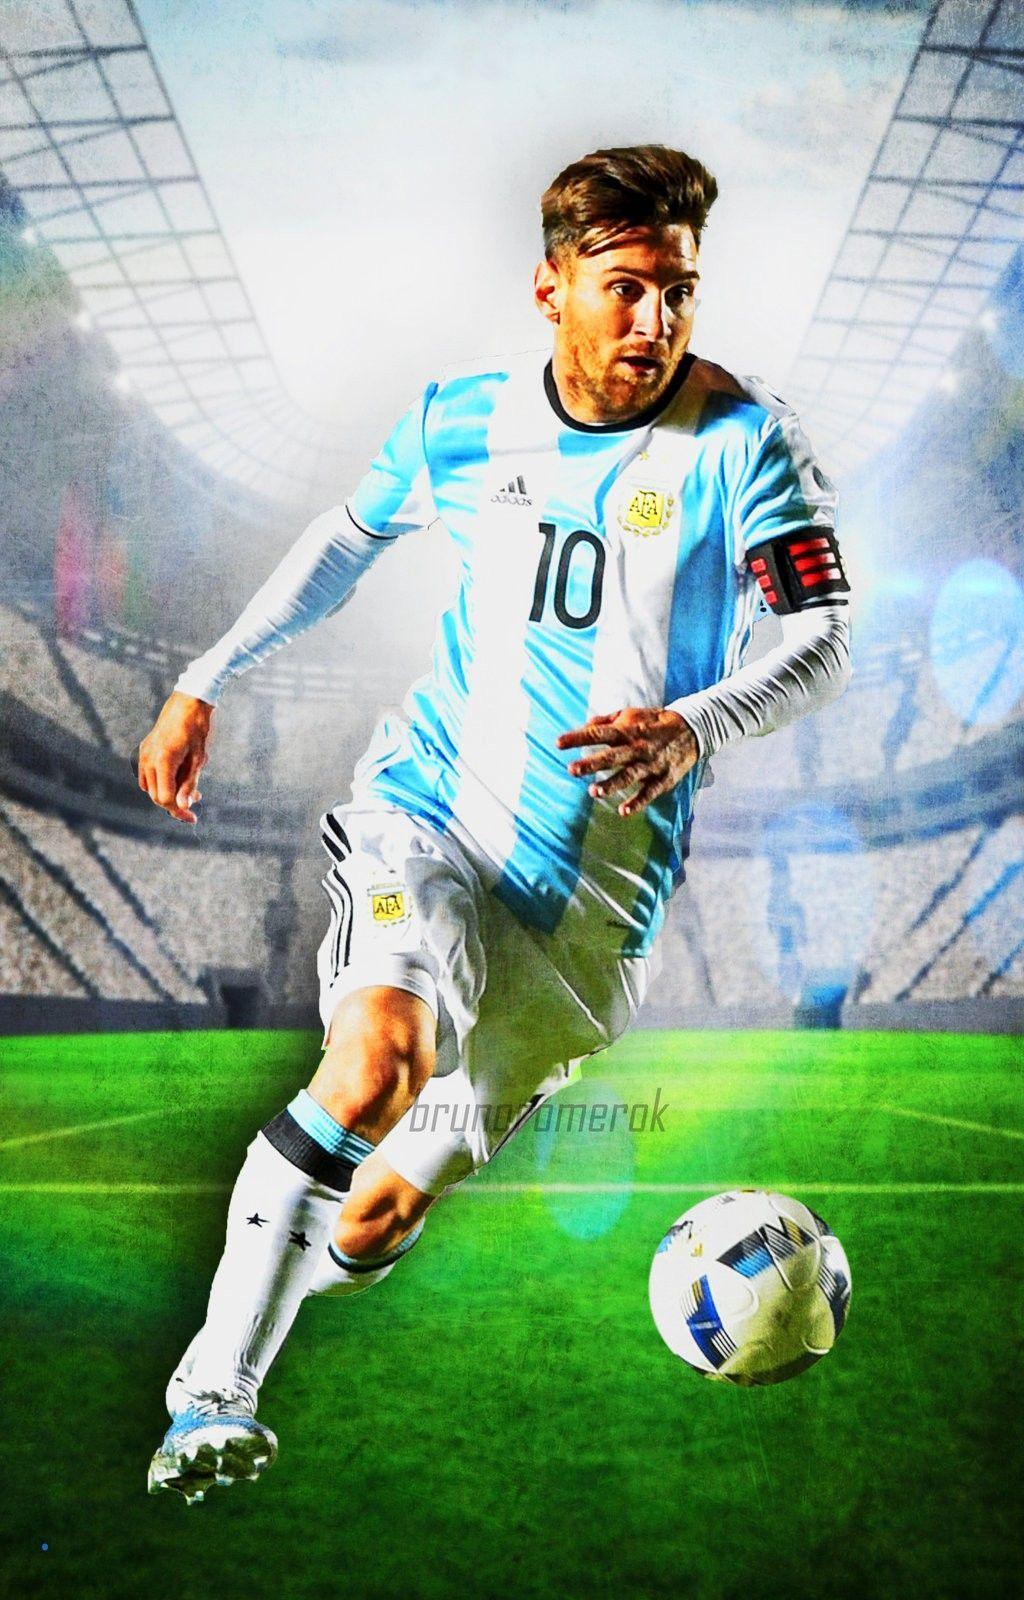 Messi Argentina Wallpapers - Top Free Messi Argentina Backgrounds